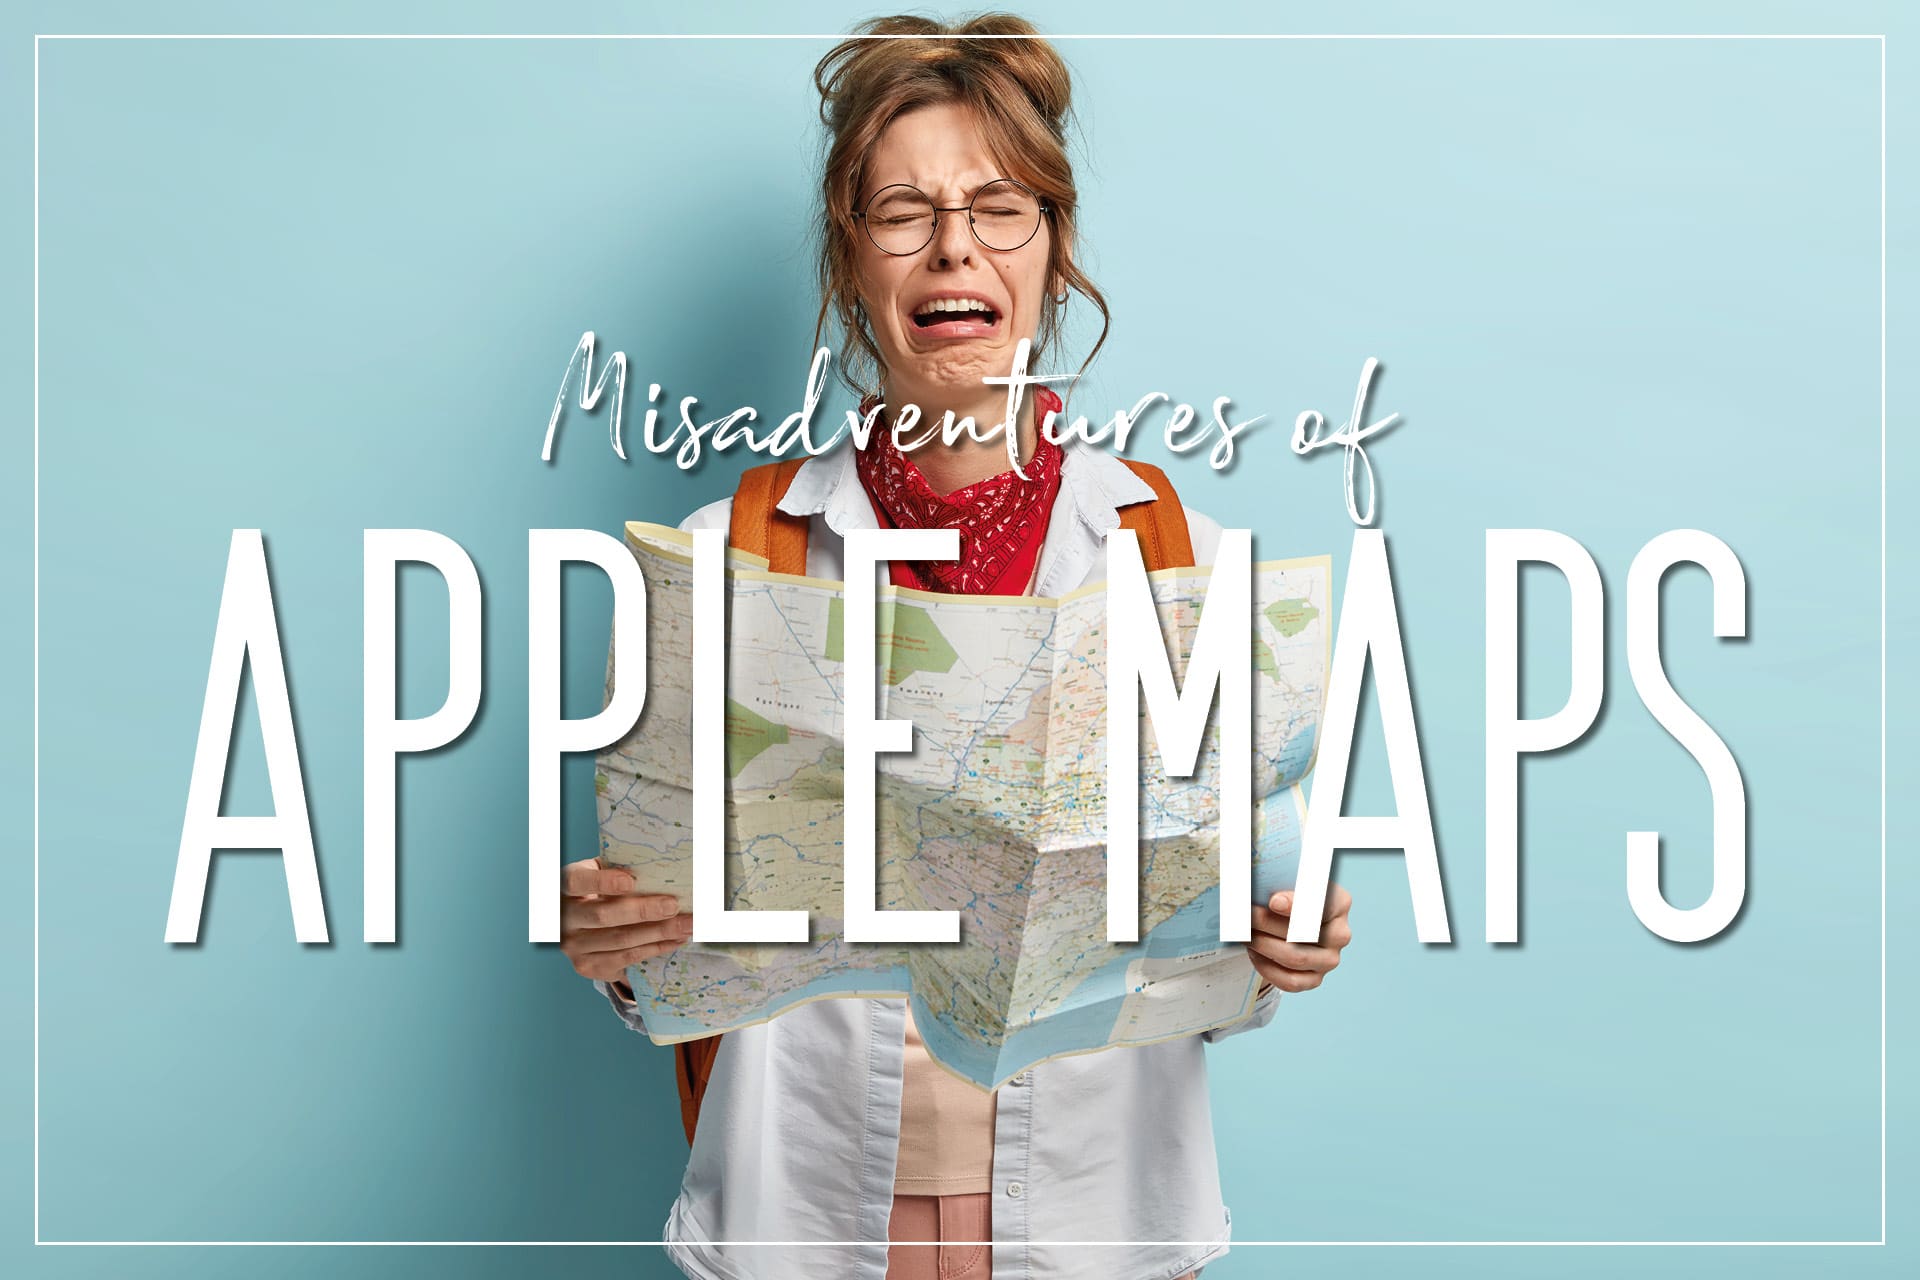 Lost in Translation: The Hilarious Adventures of Apple Maps